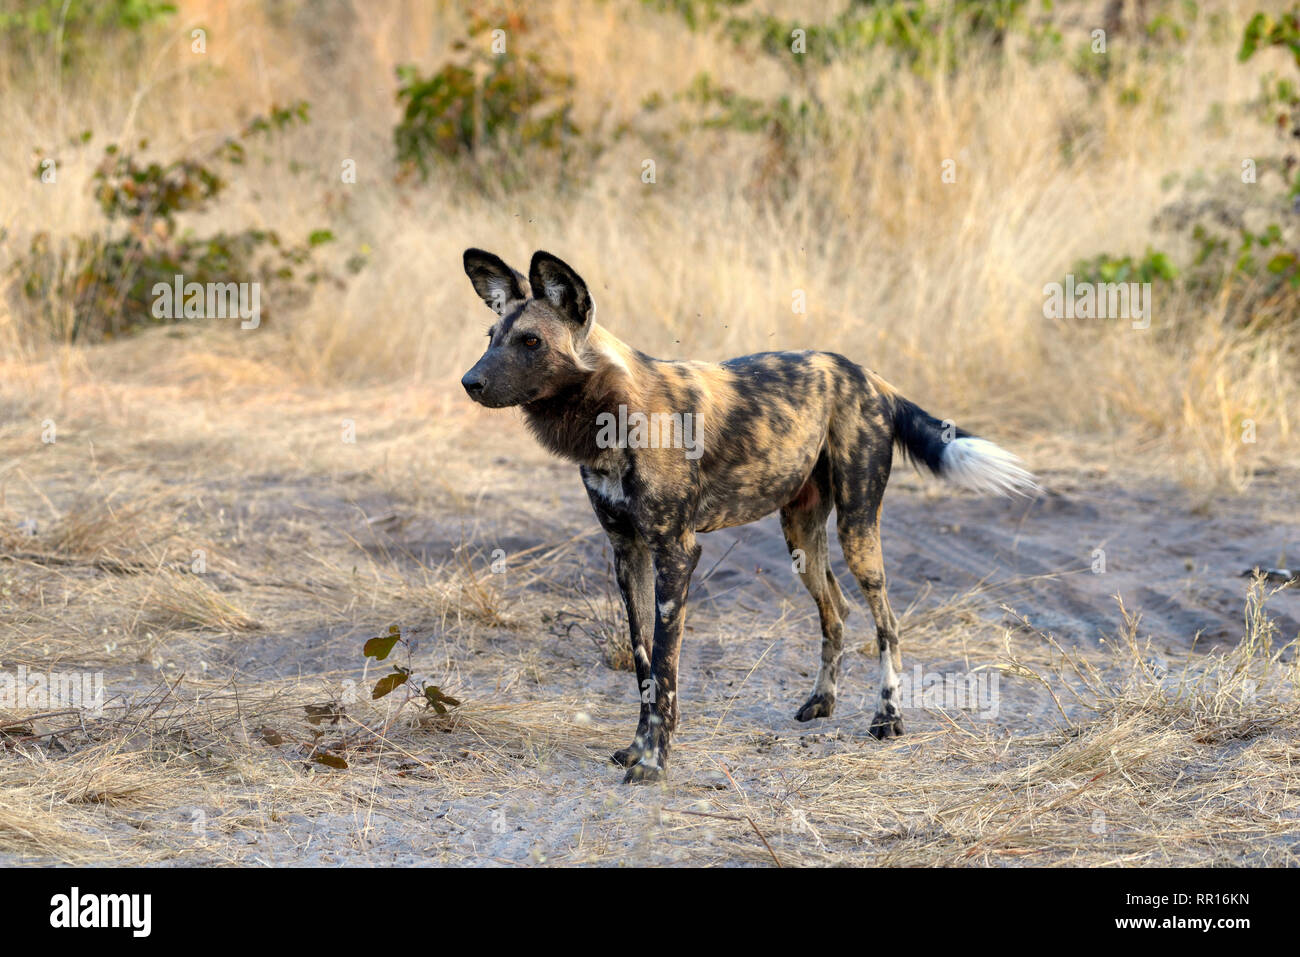 zoology, mammal (mammalia), African wild dog (Lycaon pictus), Gomoti concession Area, Okavango Delta, , Additional-Rights-Clearance-Info-Not-Available Stock Photo